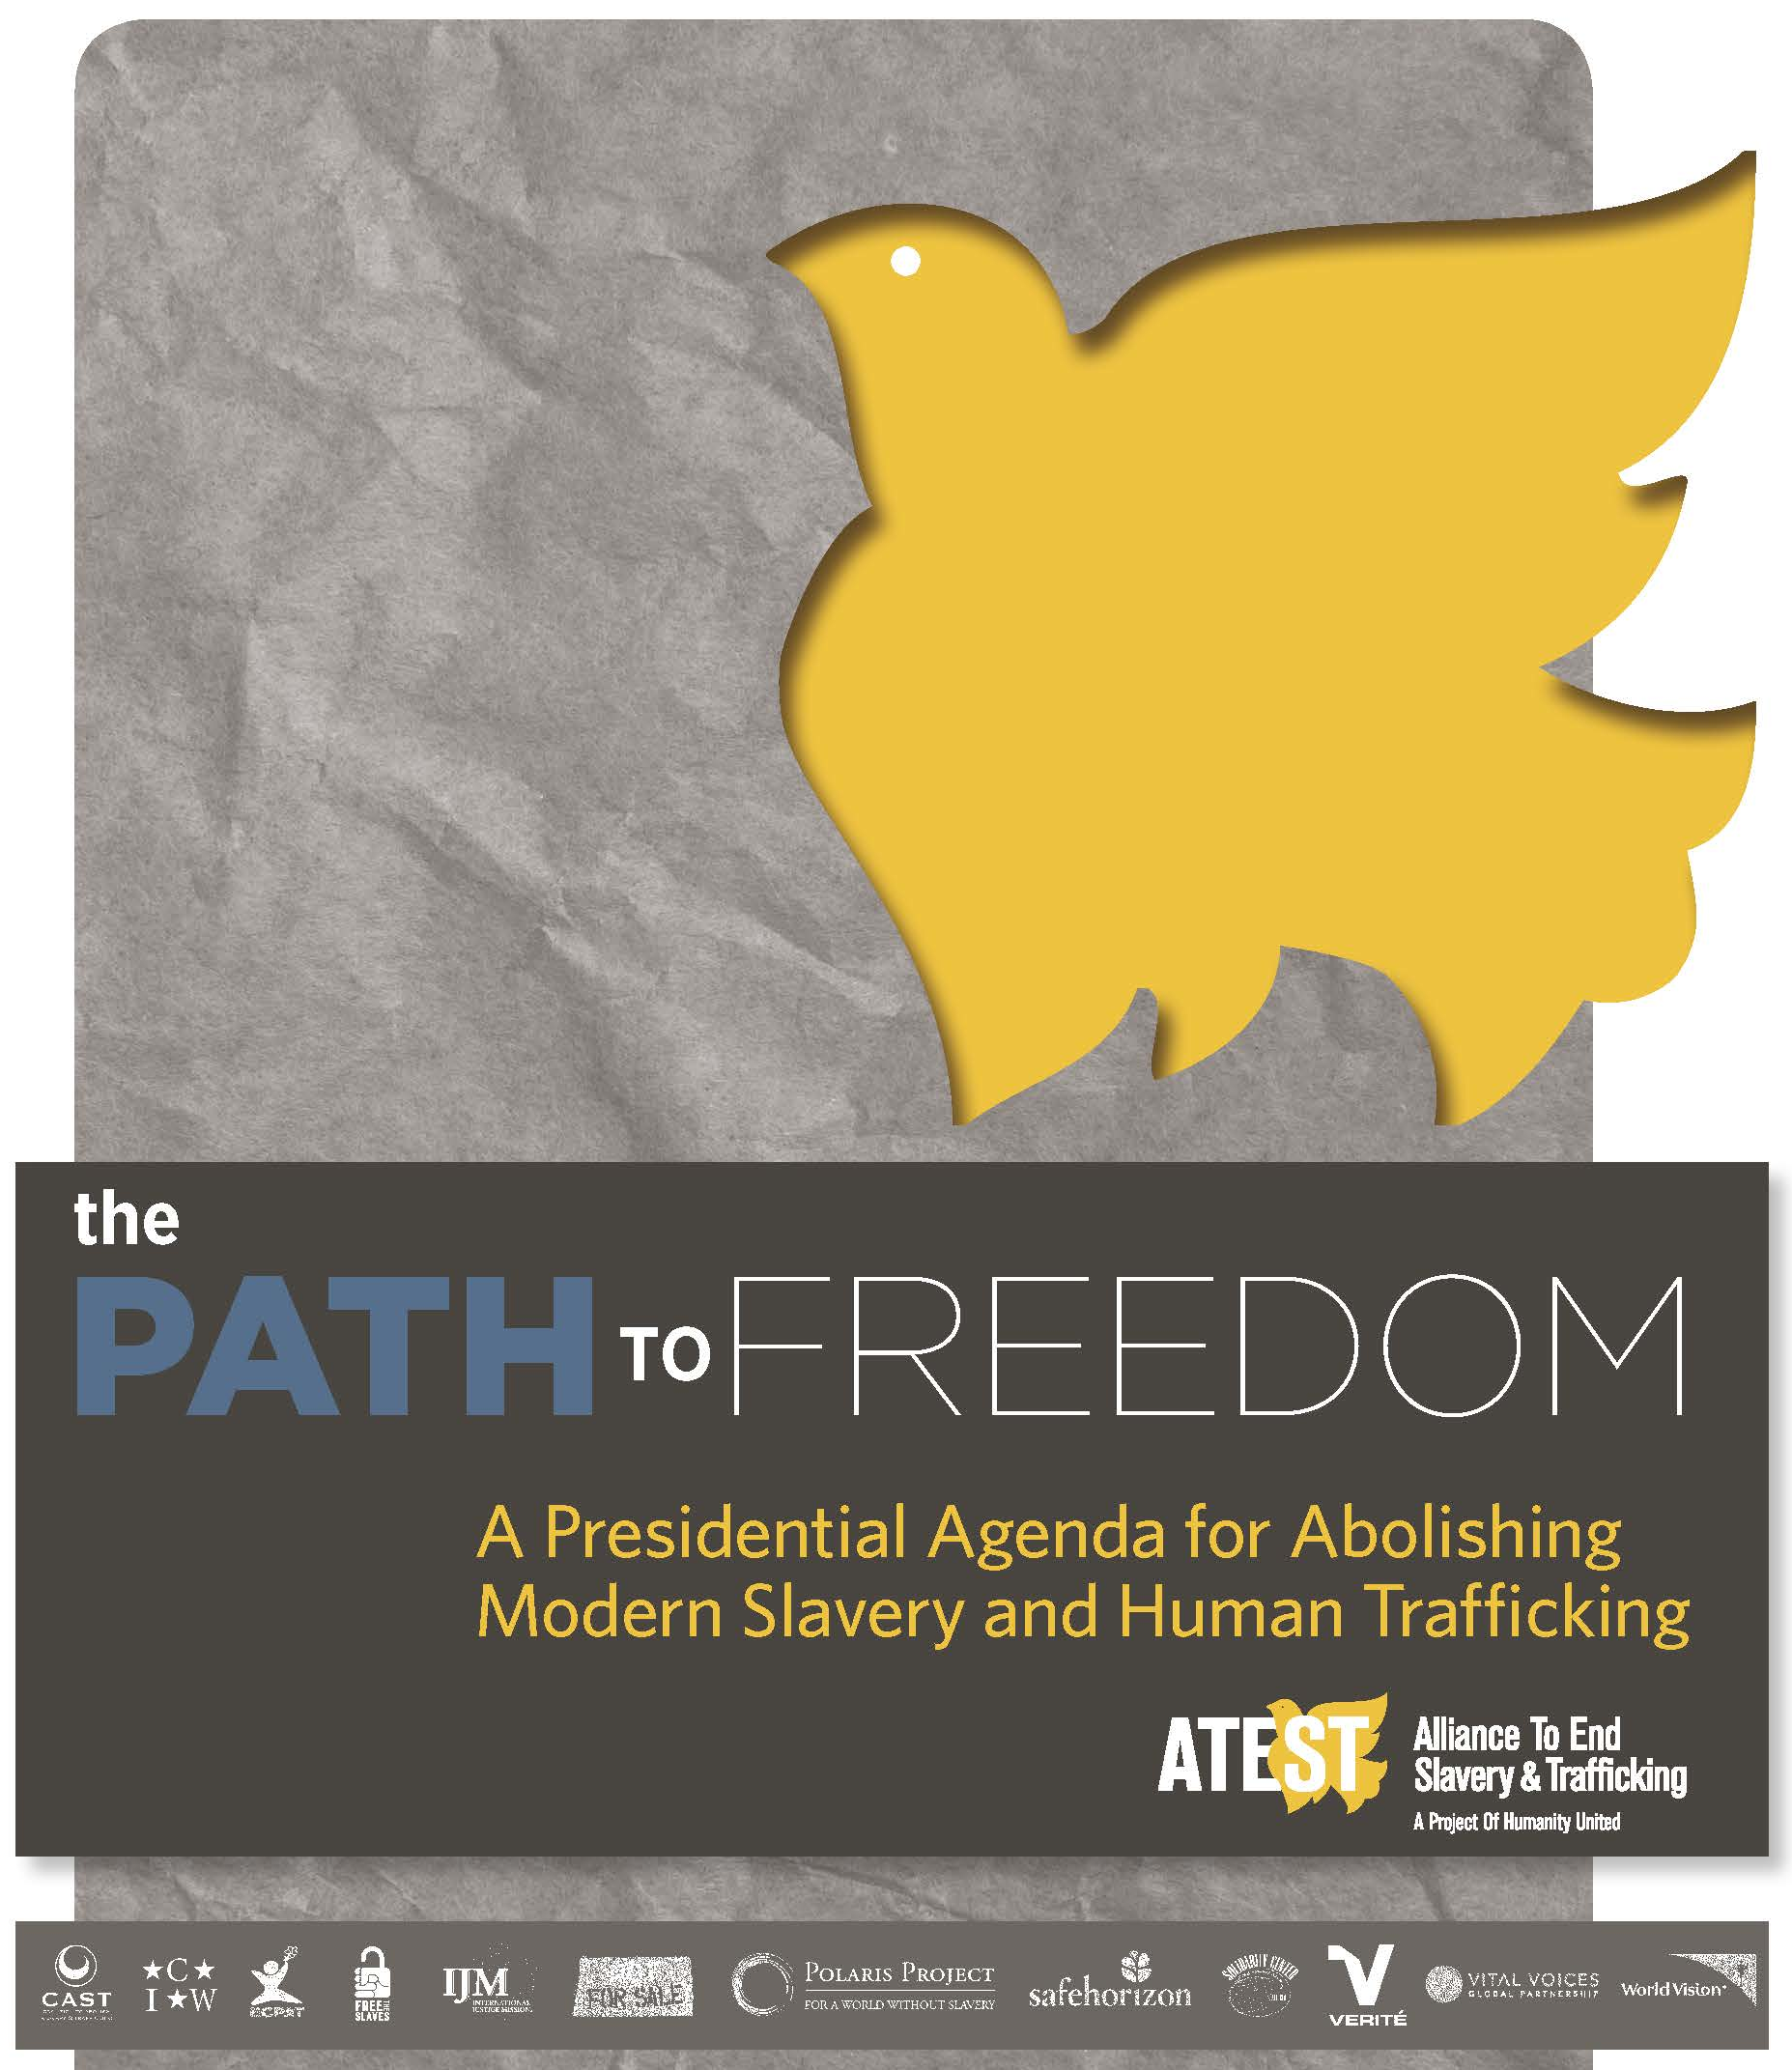 “Path to Freedom” Report Outlines How Obama Can Make Historic Progress on Slavery